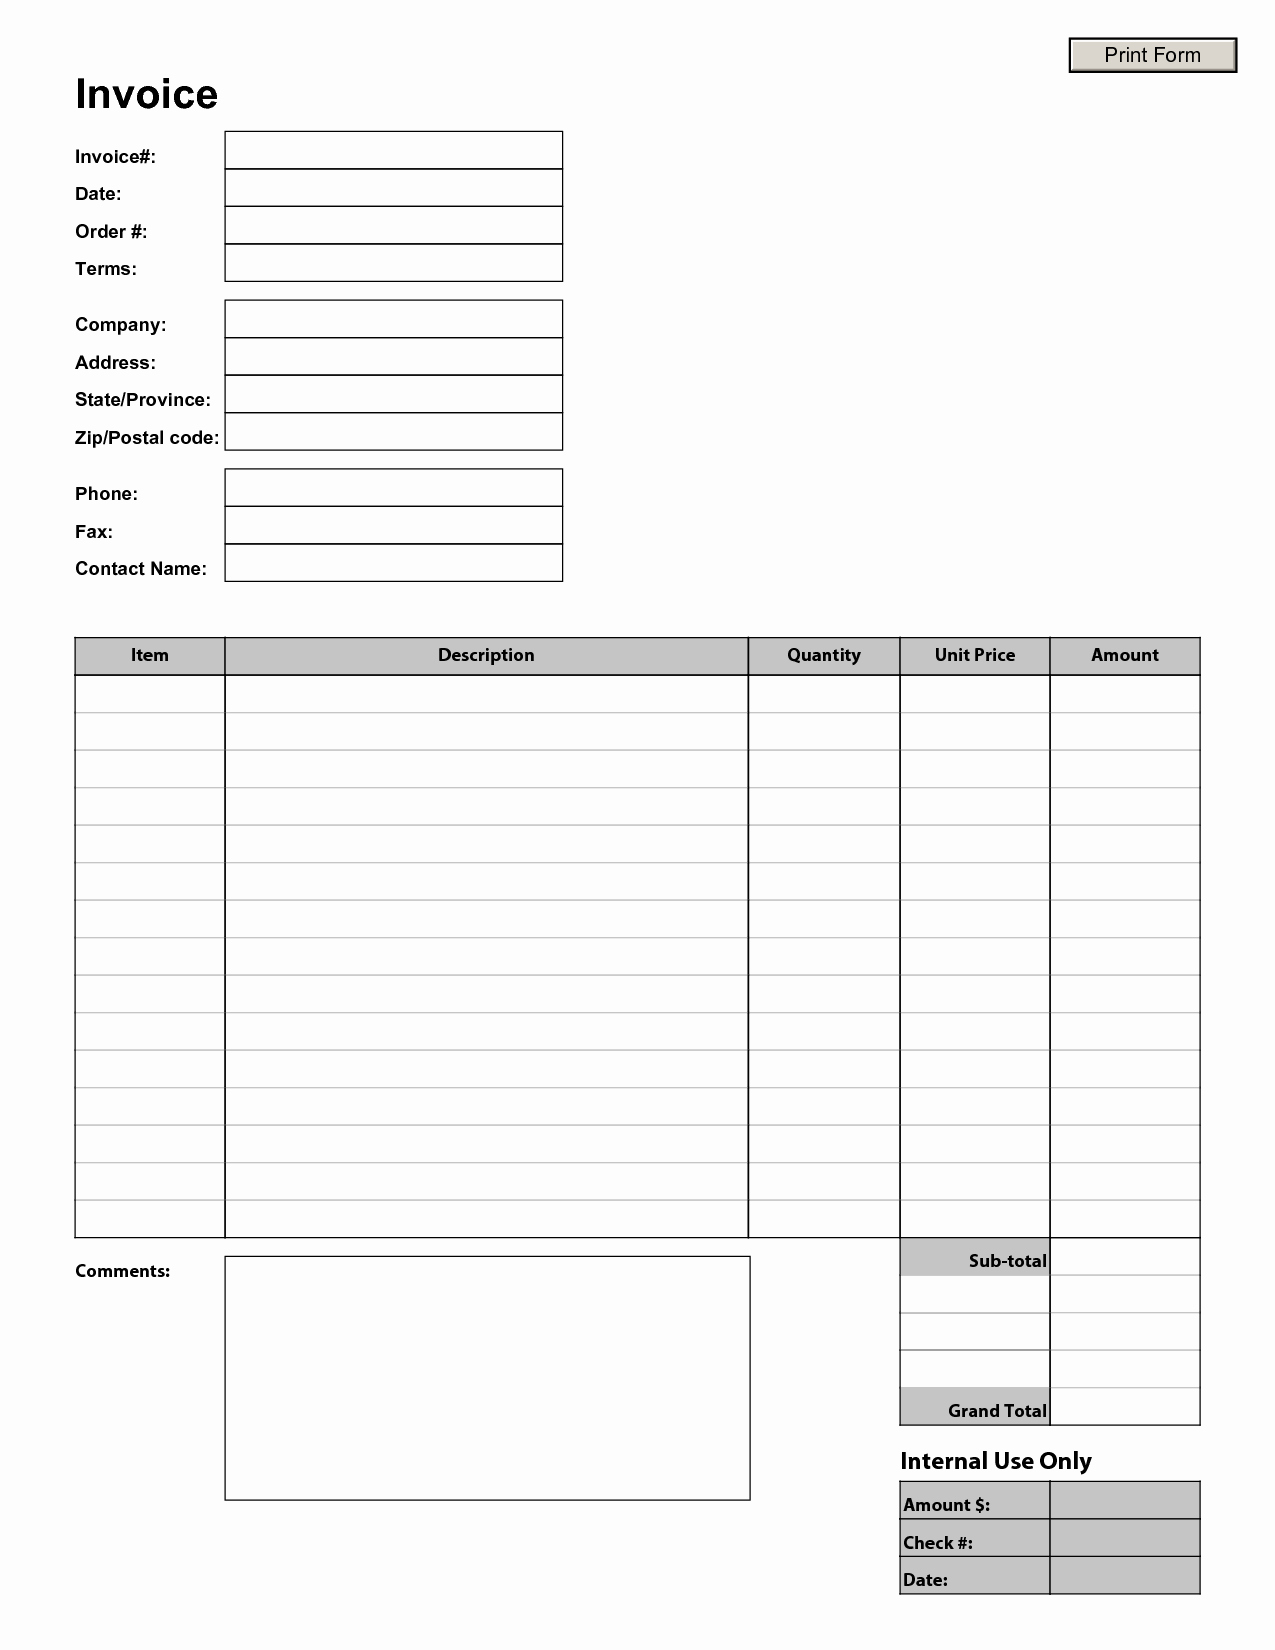 Free Downloadable Invoice Template Best Of Blank Invoice Template Blank Invoice